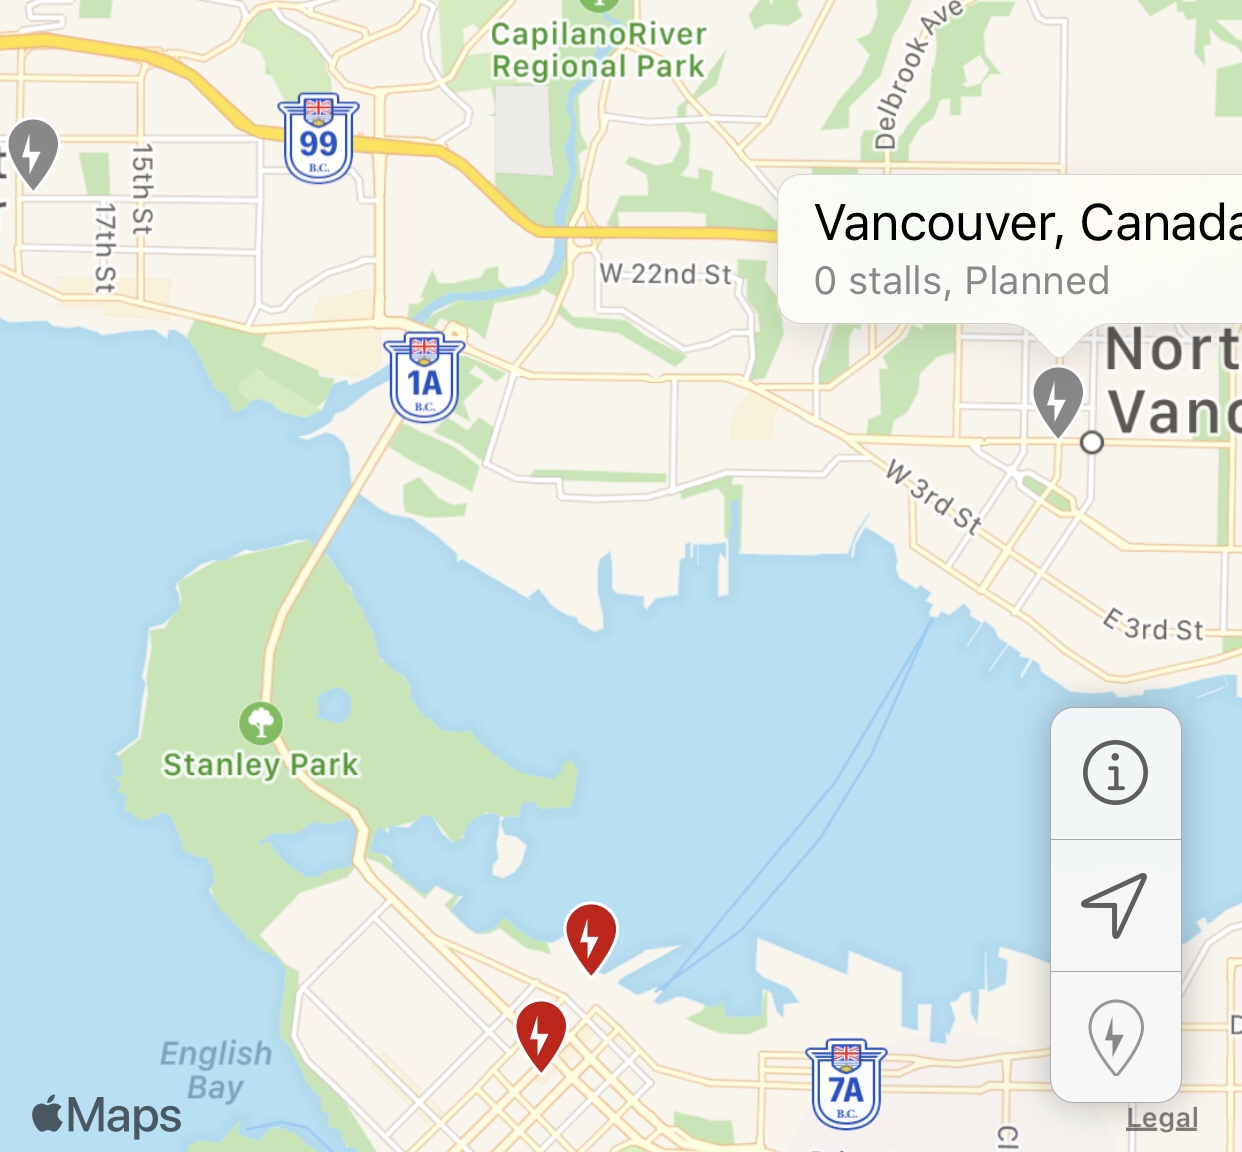 Planned Superchargers on north shore Vancouver - Imgur.jpg